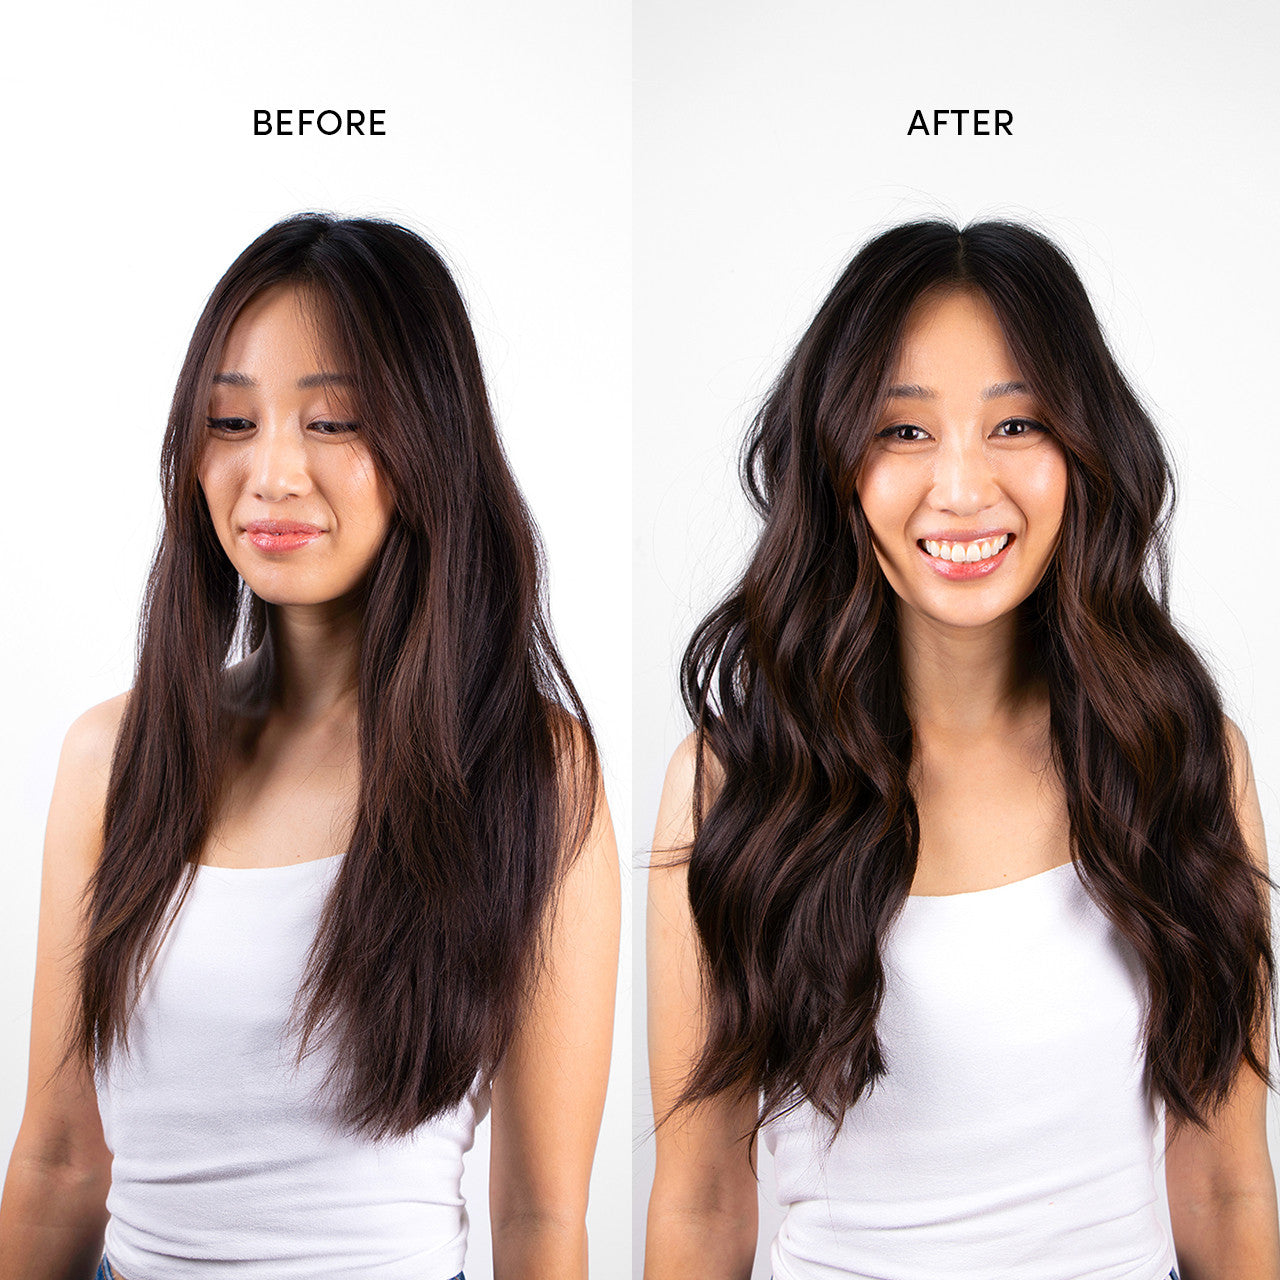 model before and after using the Dry Texture Spray